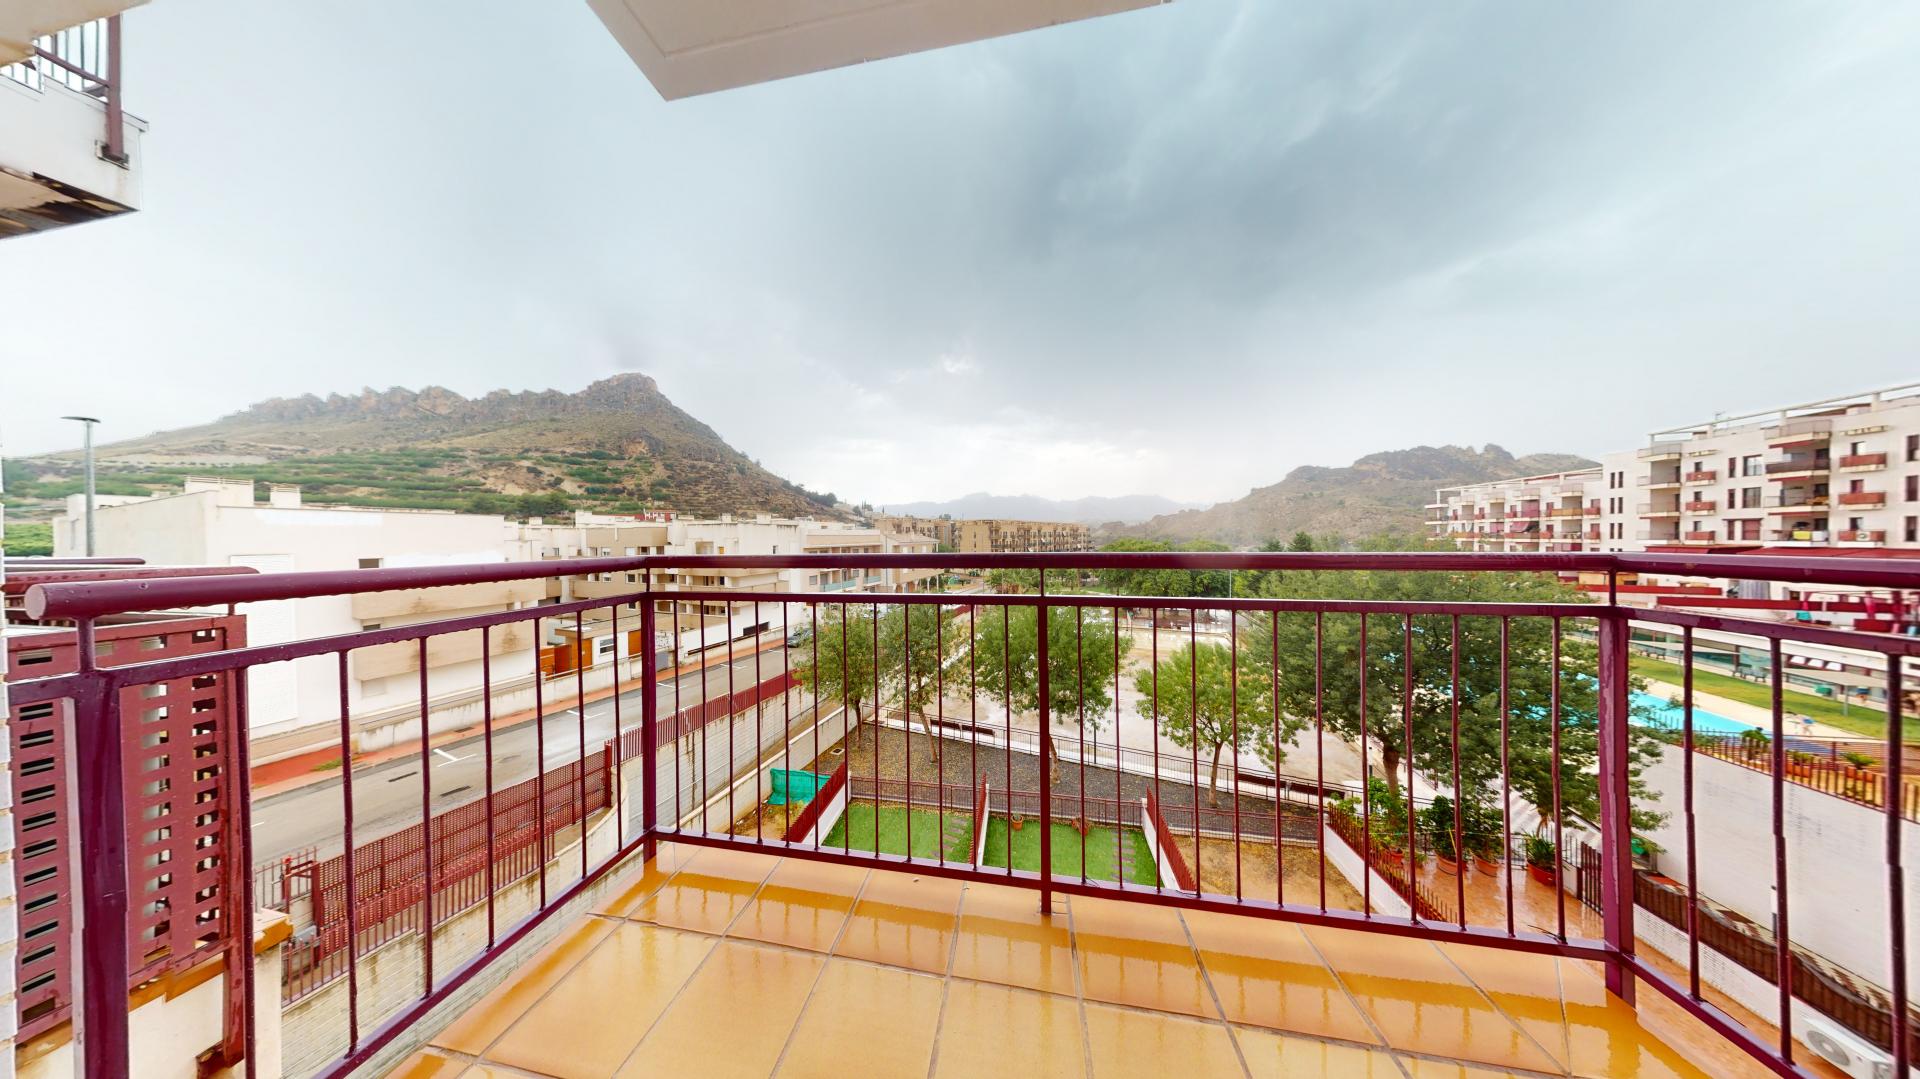 1 bedroom Apartment with terrace in Fortuna - New build in Medvilla Spanje